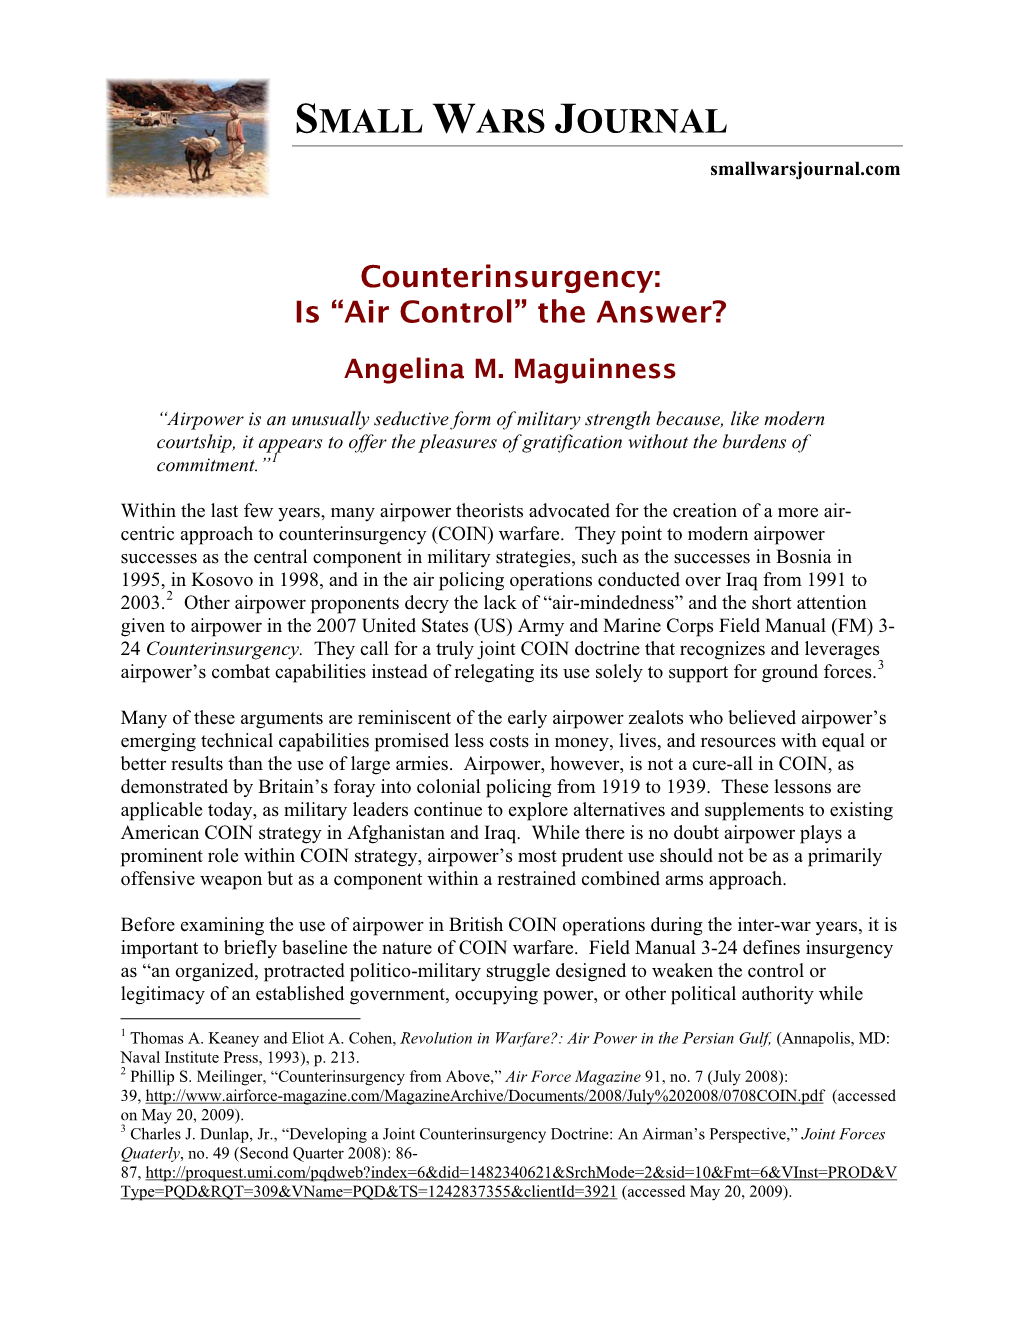 Counterinsurgency: Is “Air Control” the Answer?